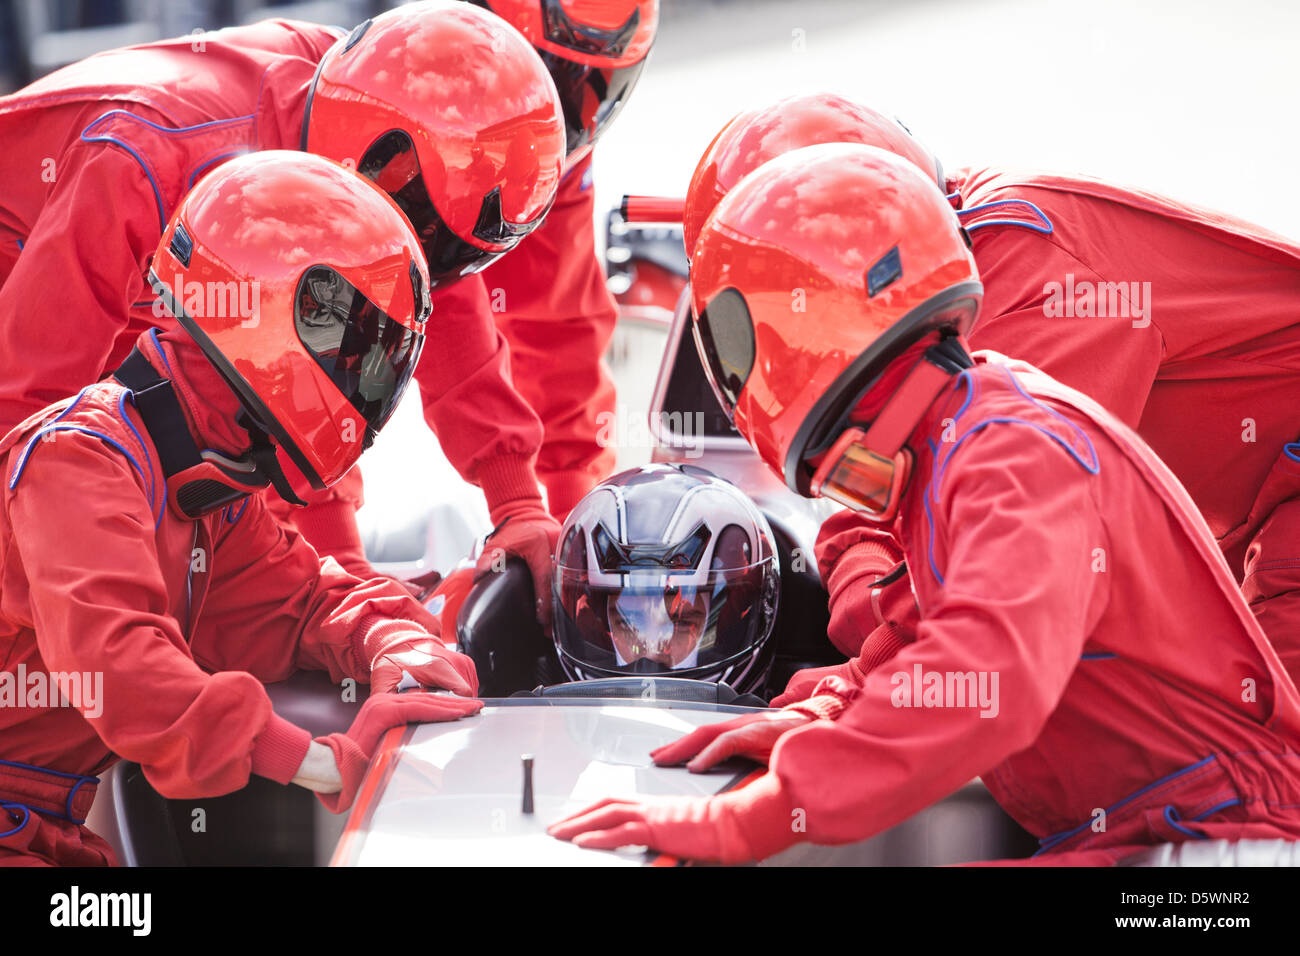 Racing team working at pit stop Banque D'Images